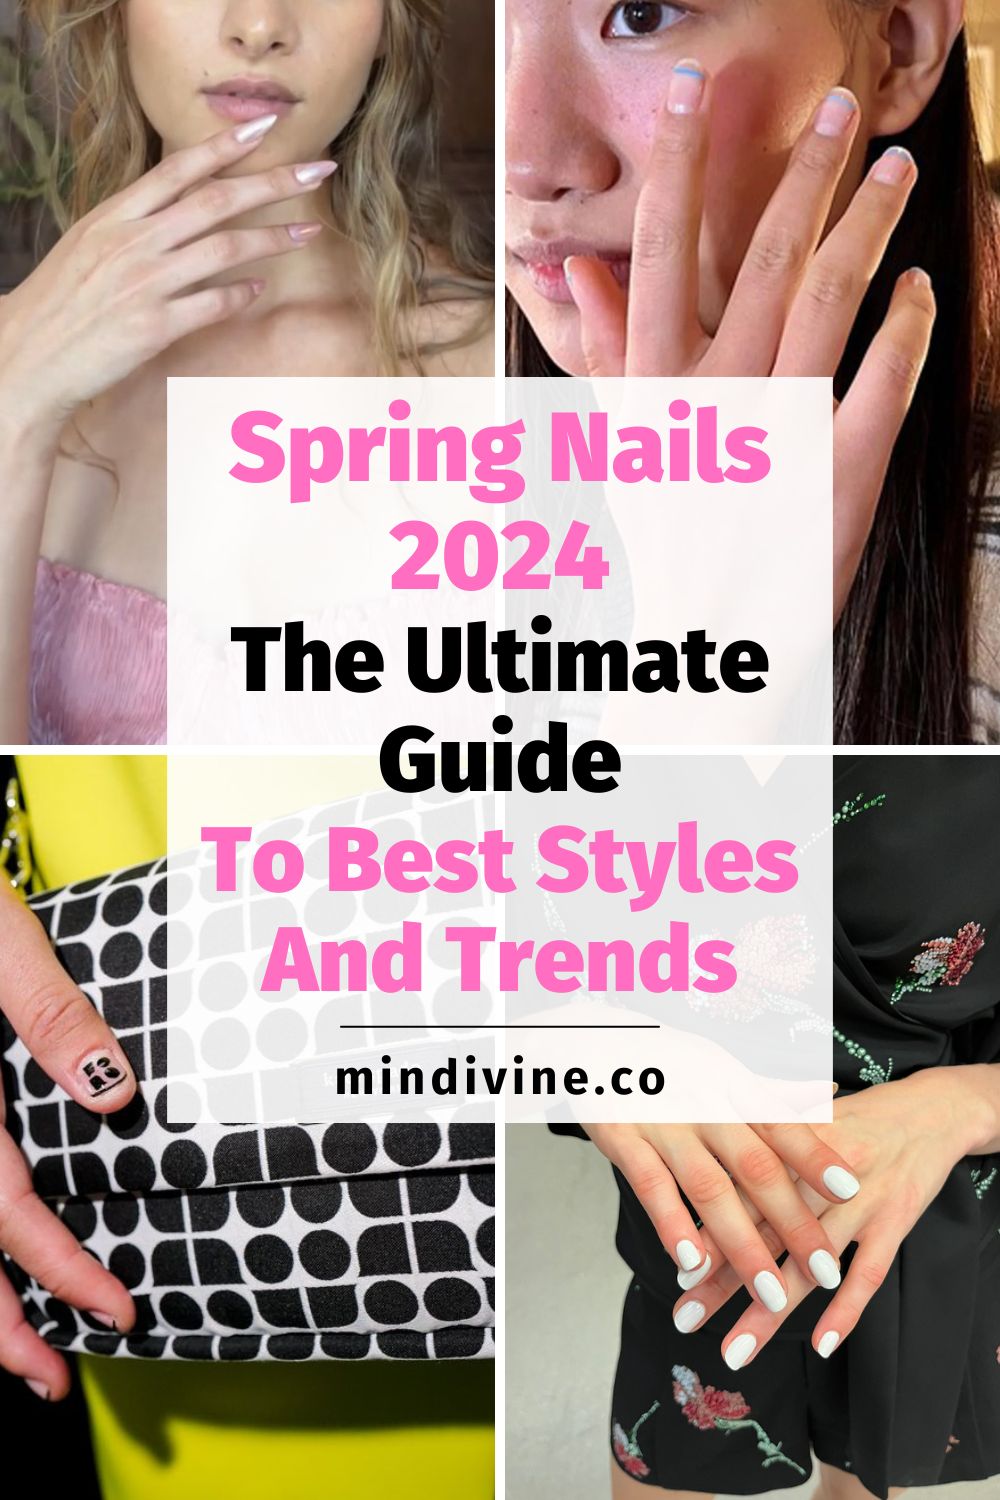 Spring Nails 2024: 4 Styles and Trends